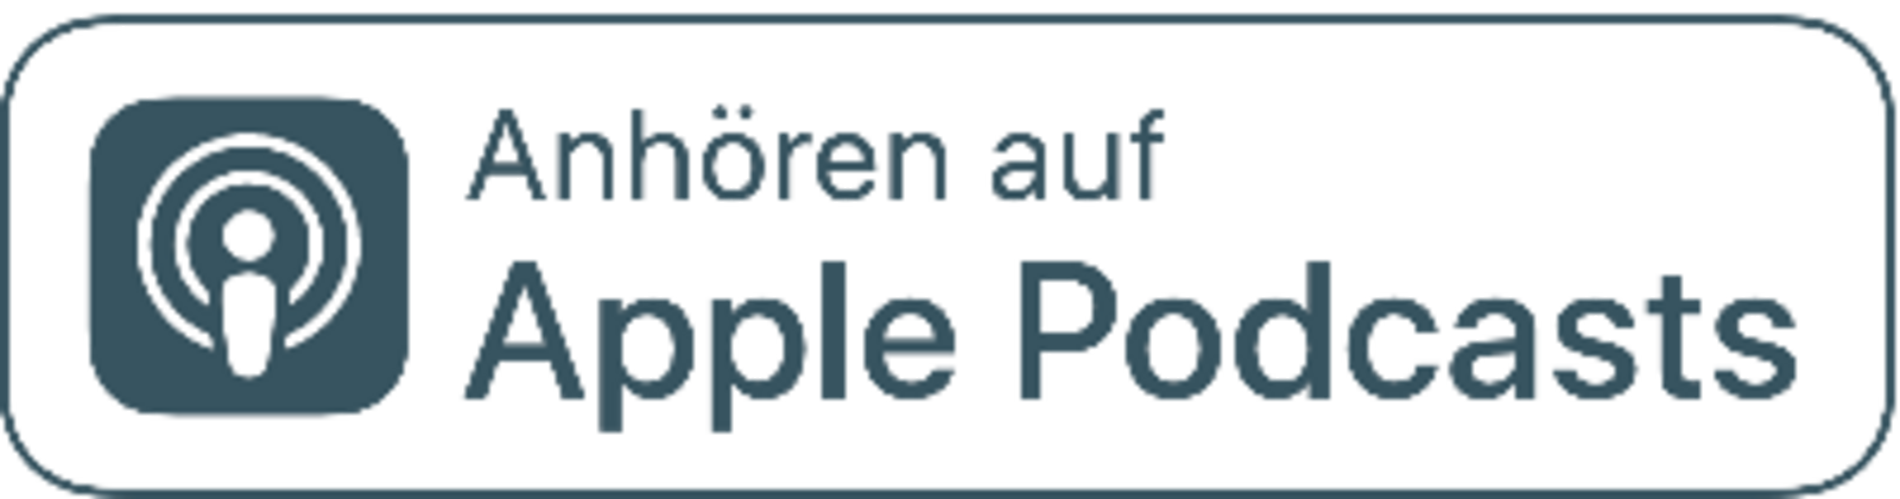 ibo Podcast bei Aplle Podcasts abonnieren